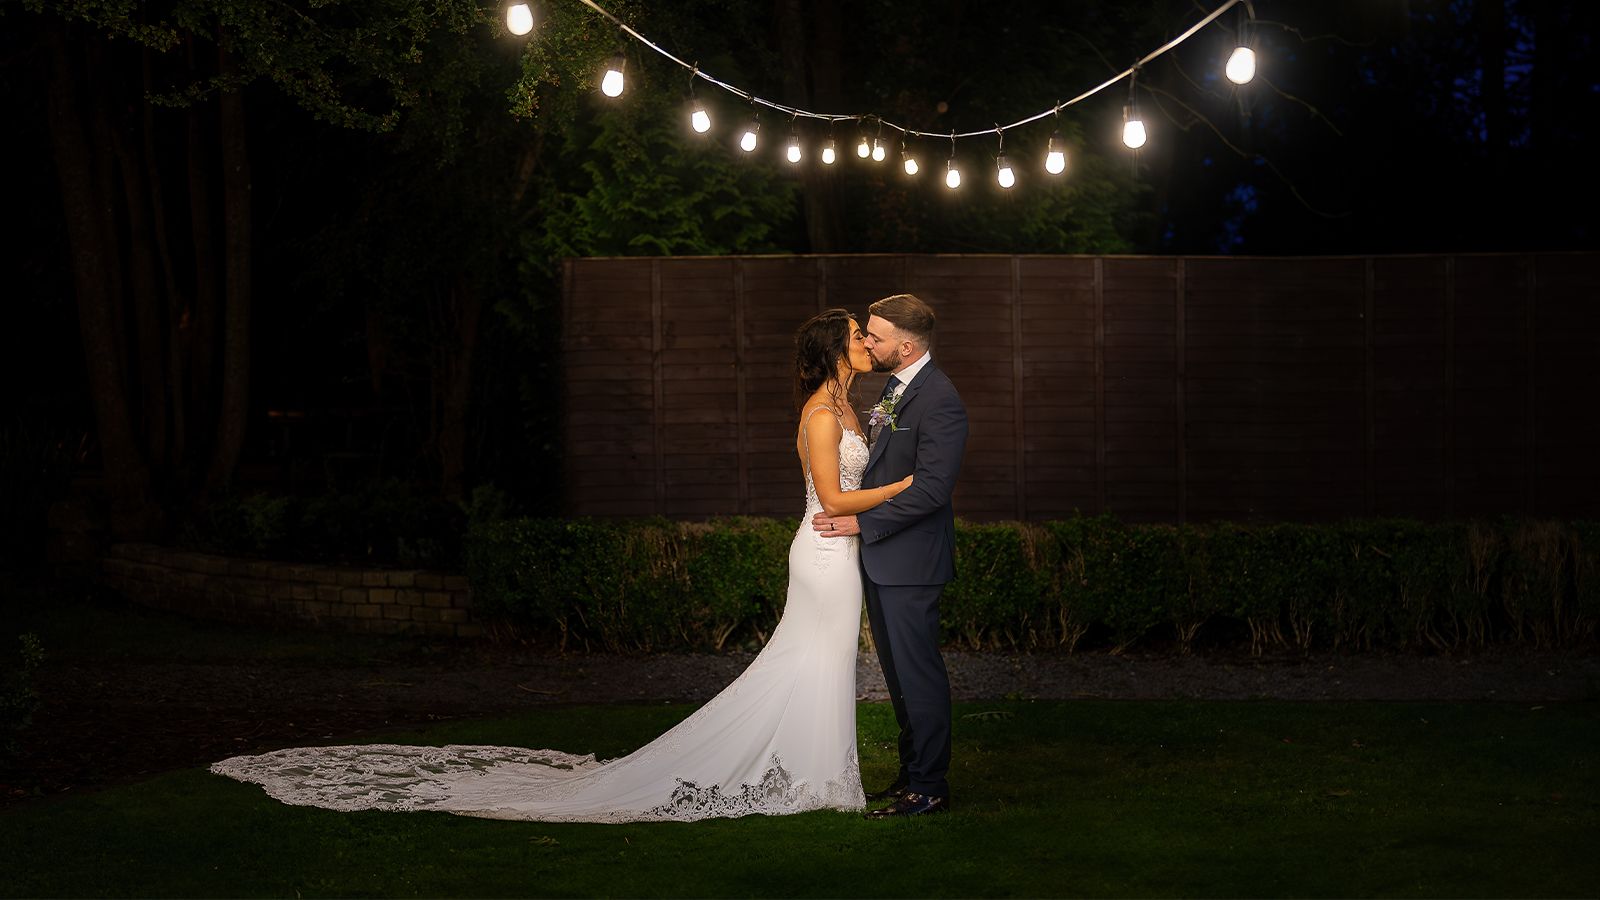 A wedding photographer captures a bride and groom embracing under string lights in a garden.